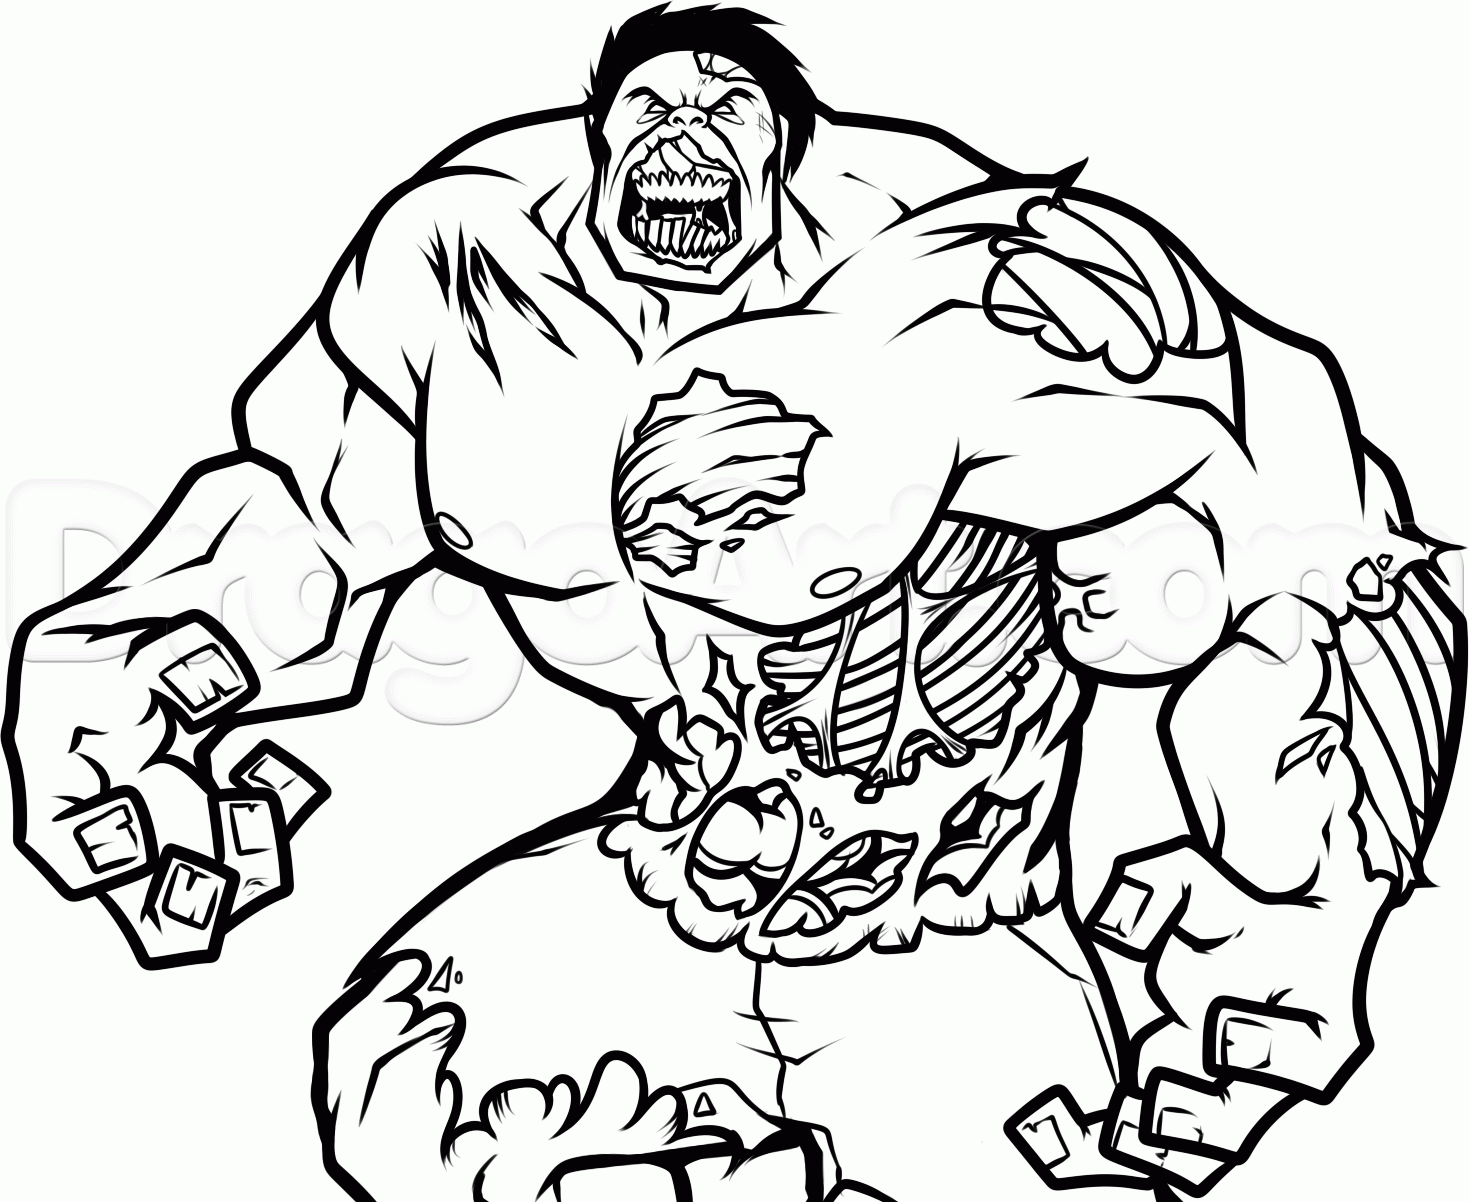 Download Zombie Hulk Colouring Pages #4824 Marvel Zombies Coloring Pages ... - Coloring Home